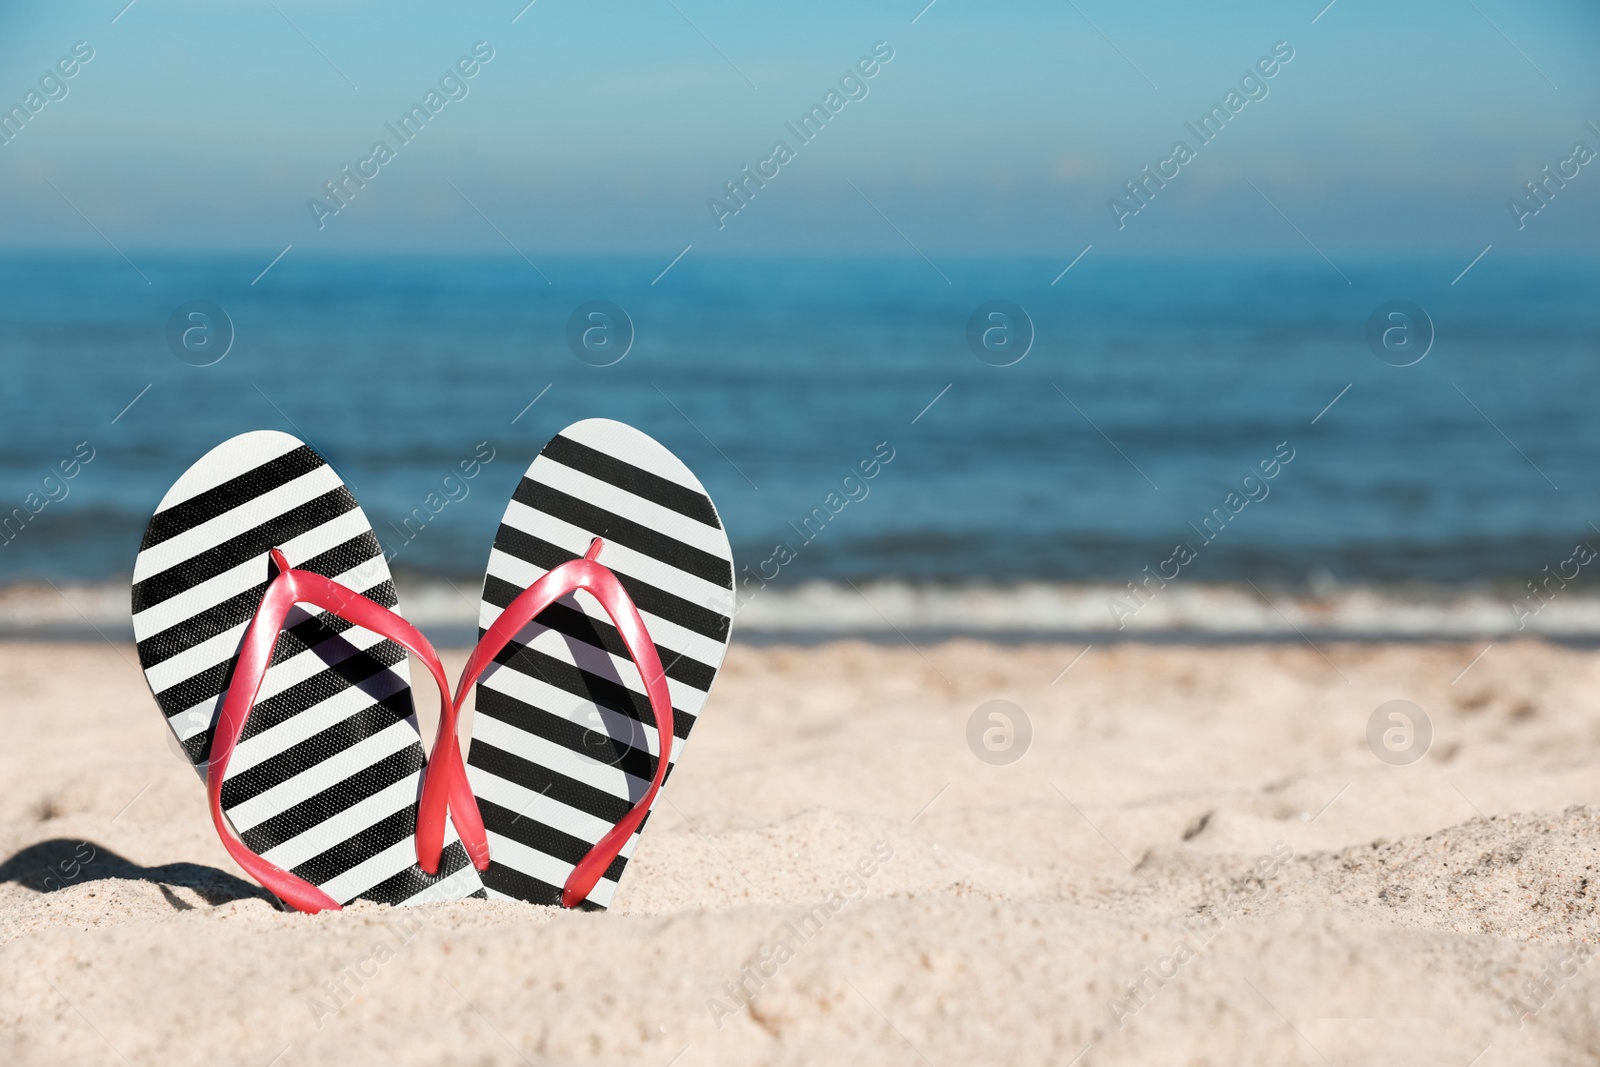 Photo of Striped flip flops in sand on beach near sea. Space for text